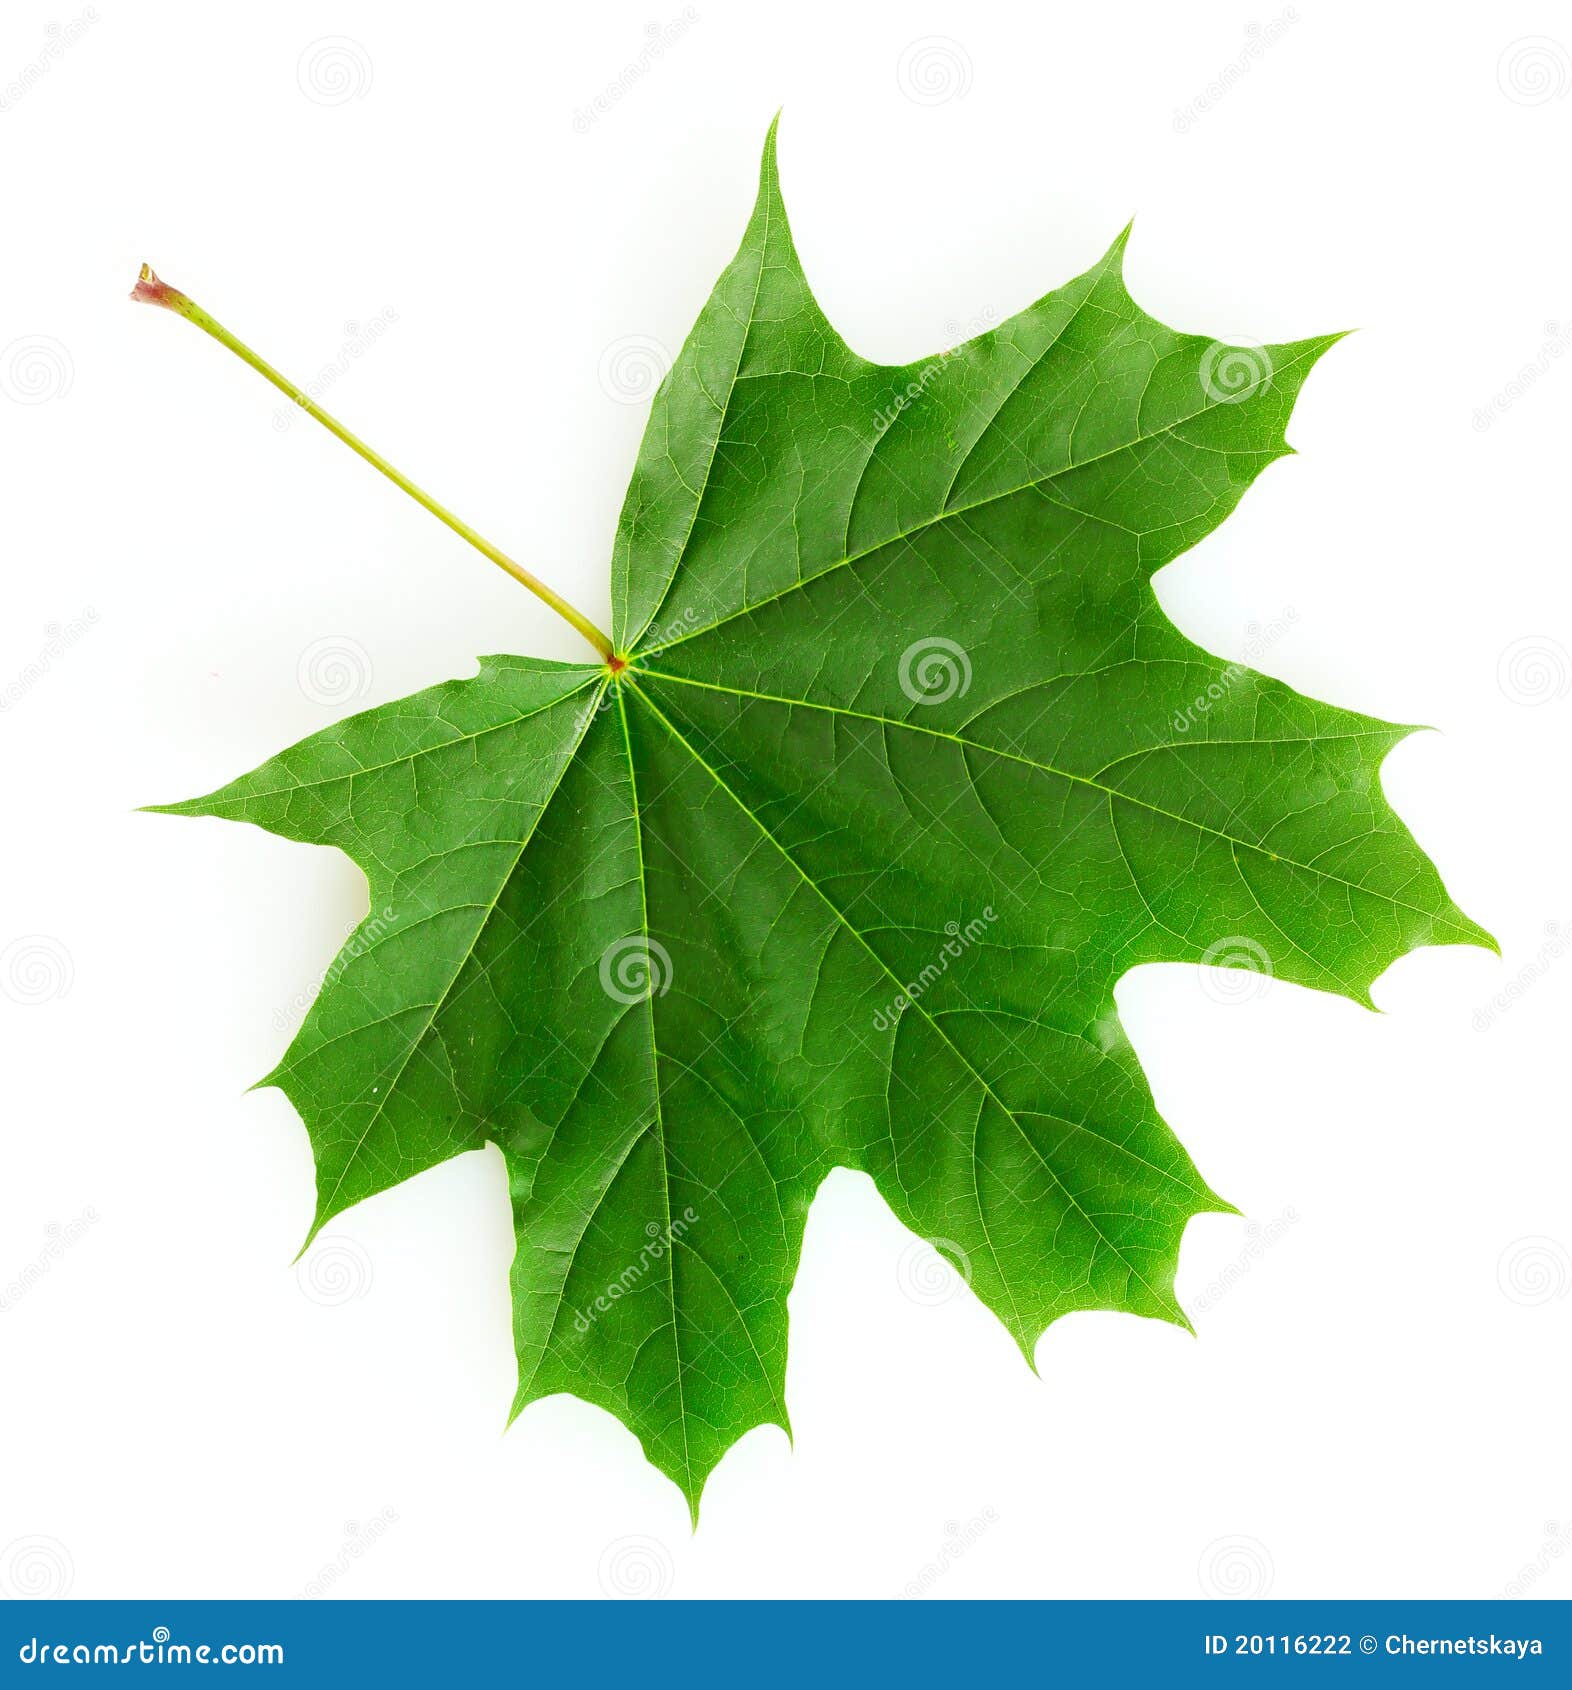 clipart green maple leaf - photo #42